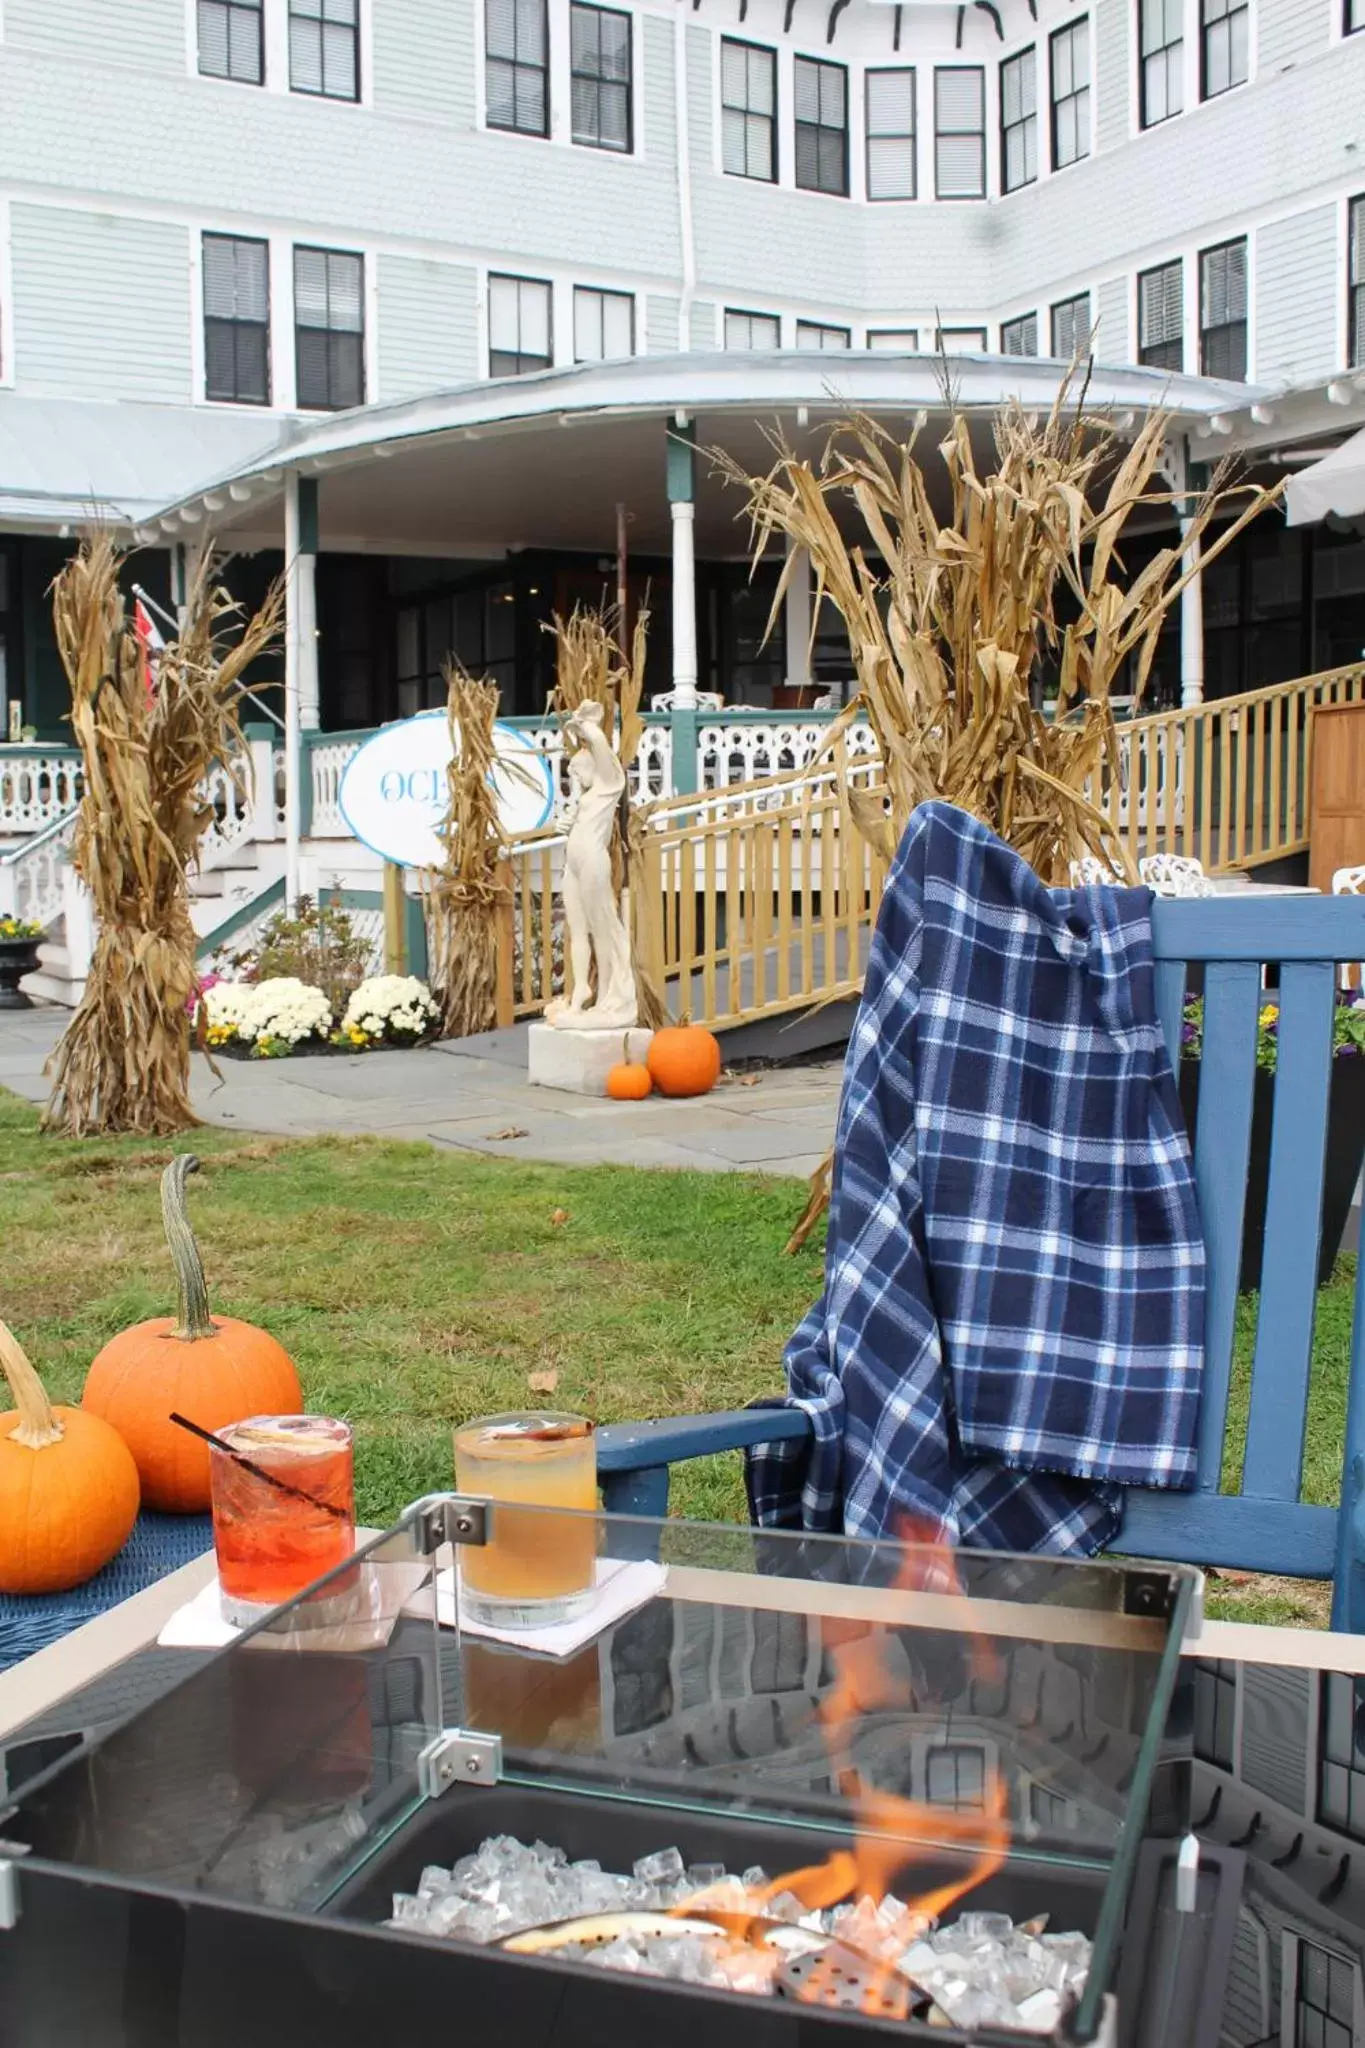 Autumn in The Inn Of Cape May